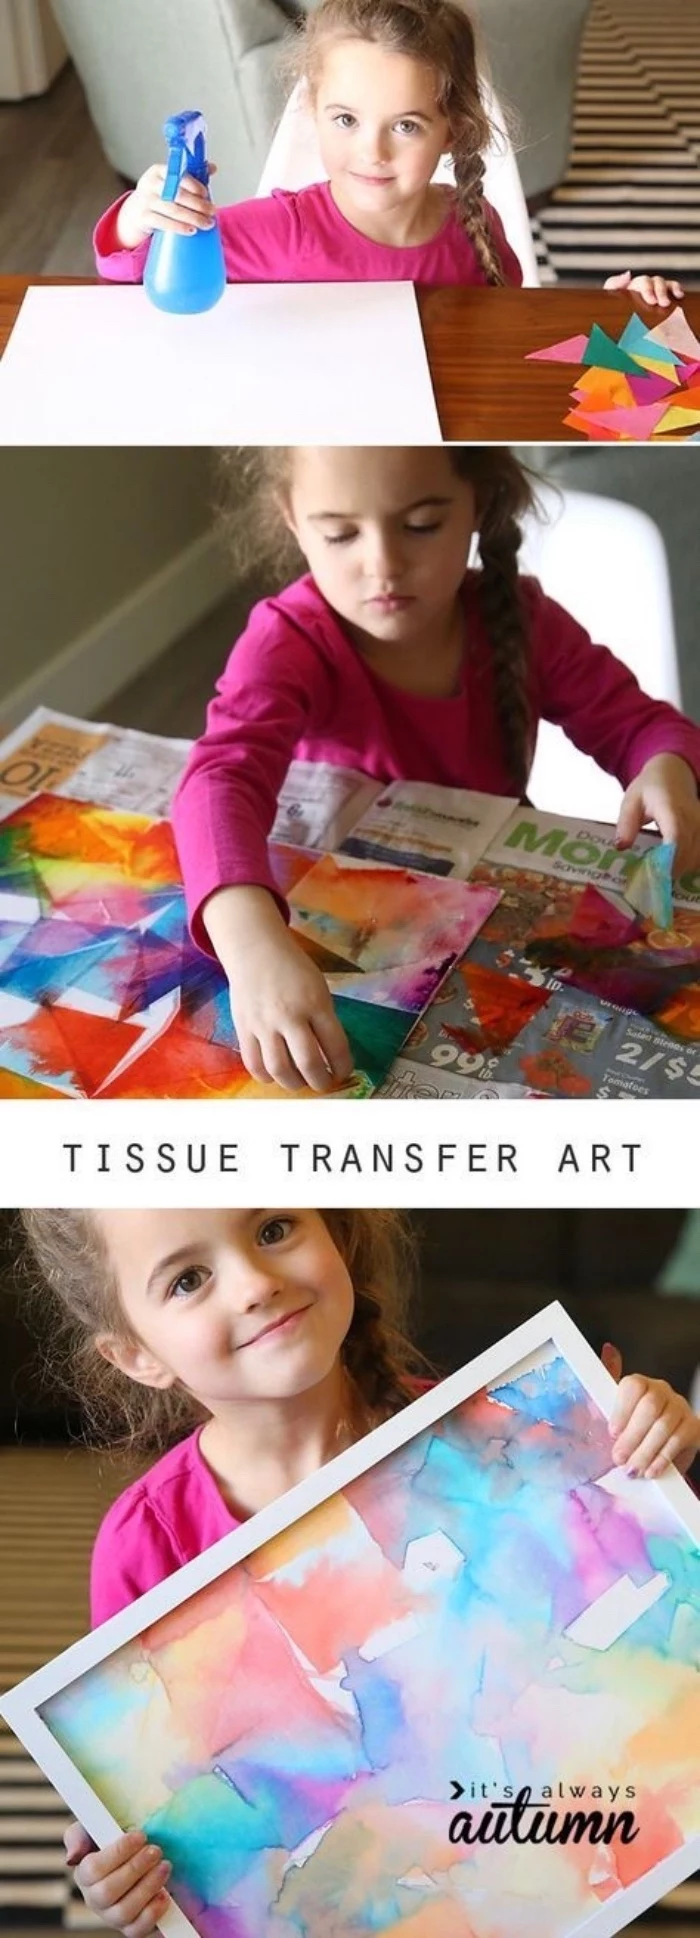 tissue transfer art, preschool classroom games, girl painting, in a white frame, step by step, diy tutorial